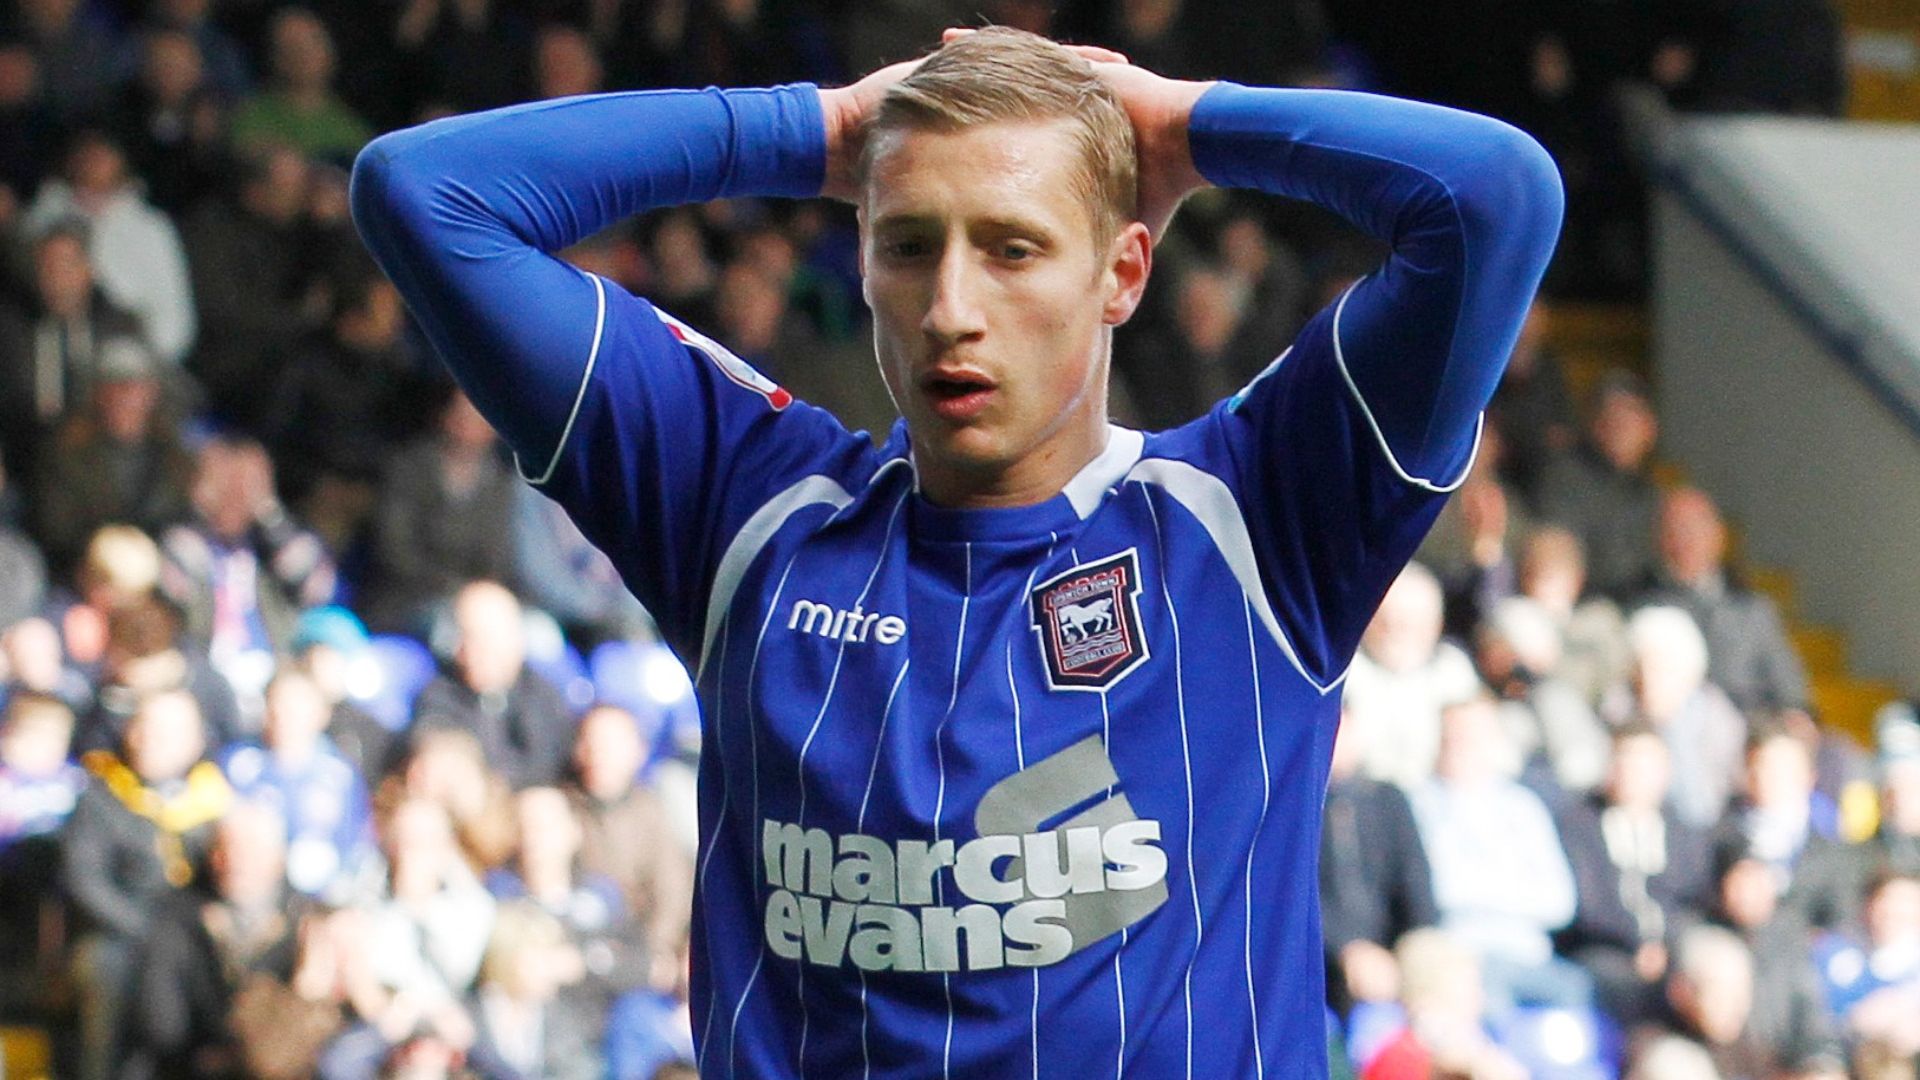 Ipswich Town's £1.5m agreement with Man Utd ended up being an underwhelming flop